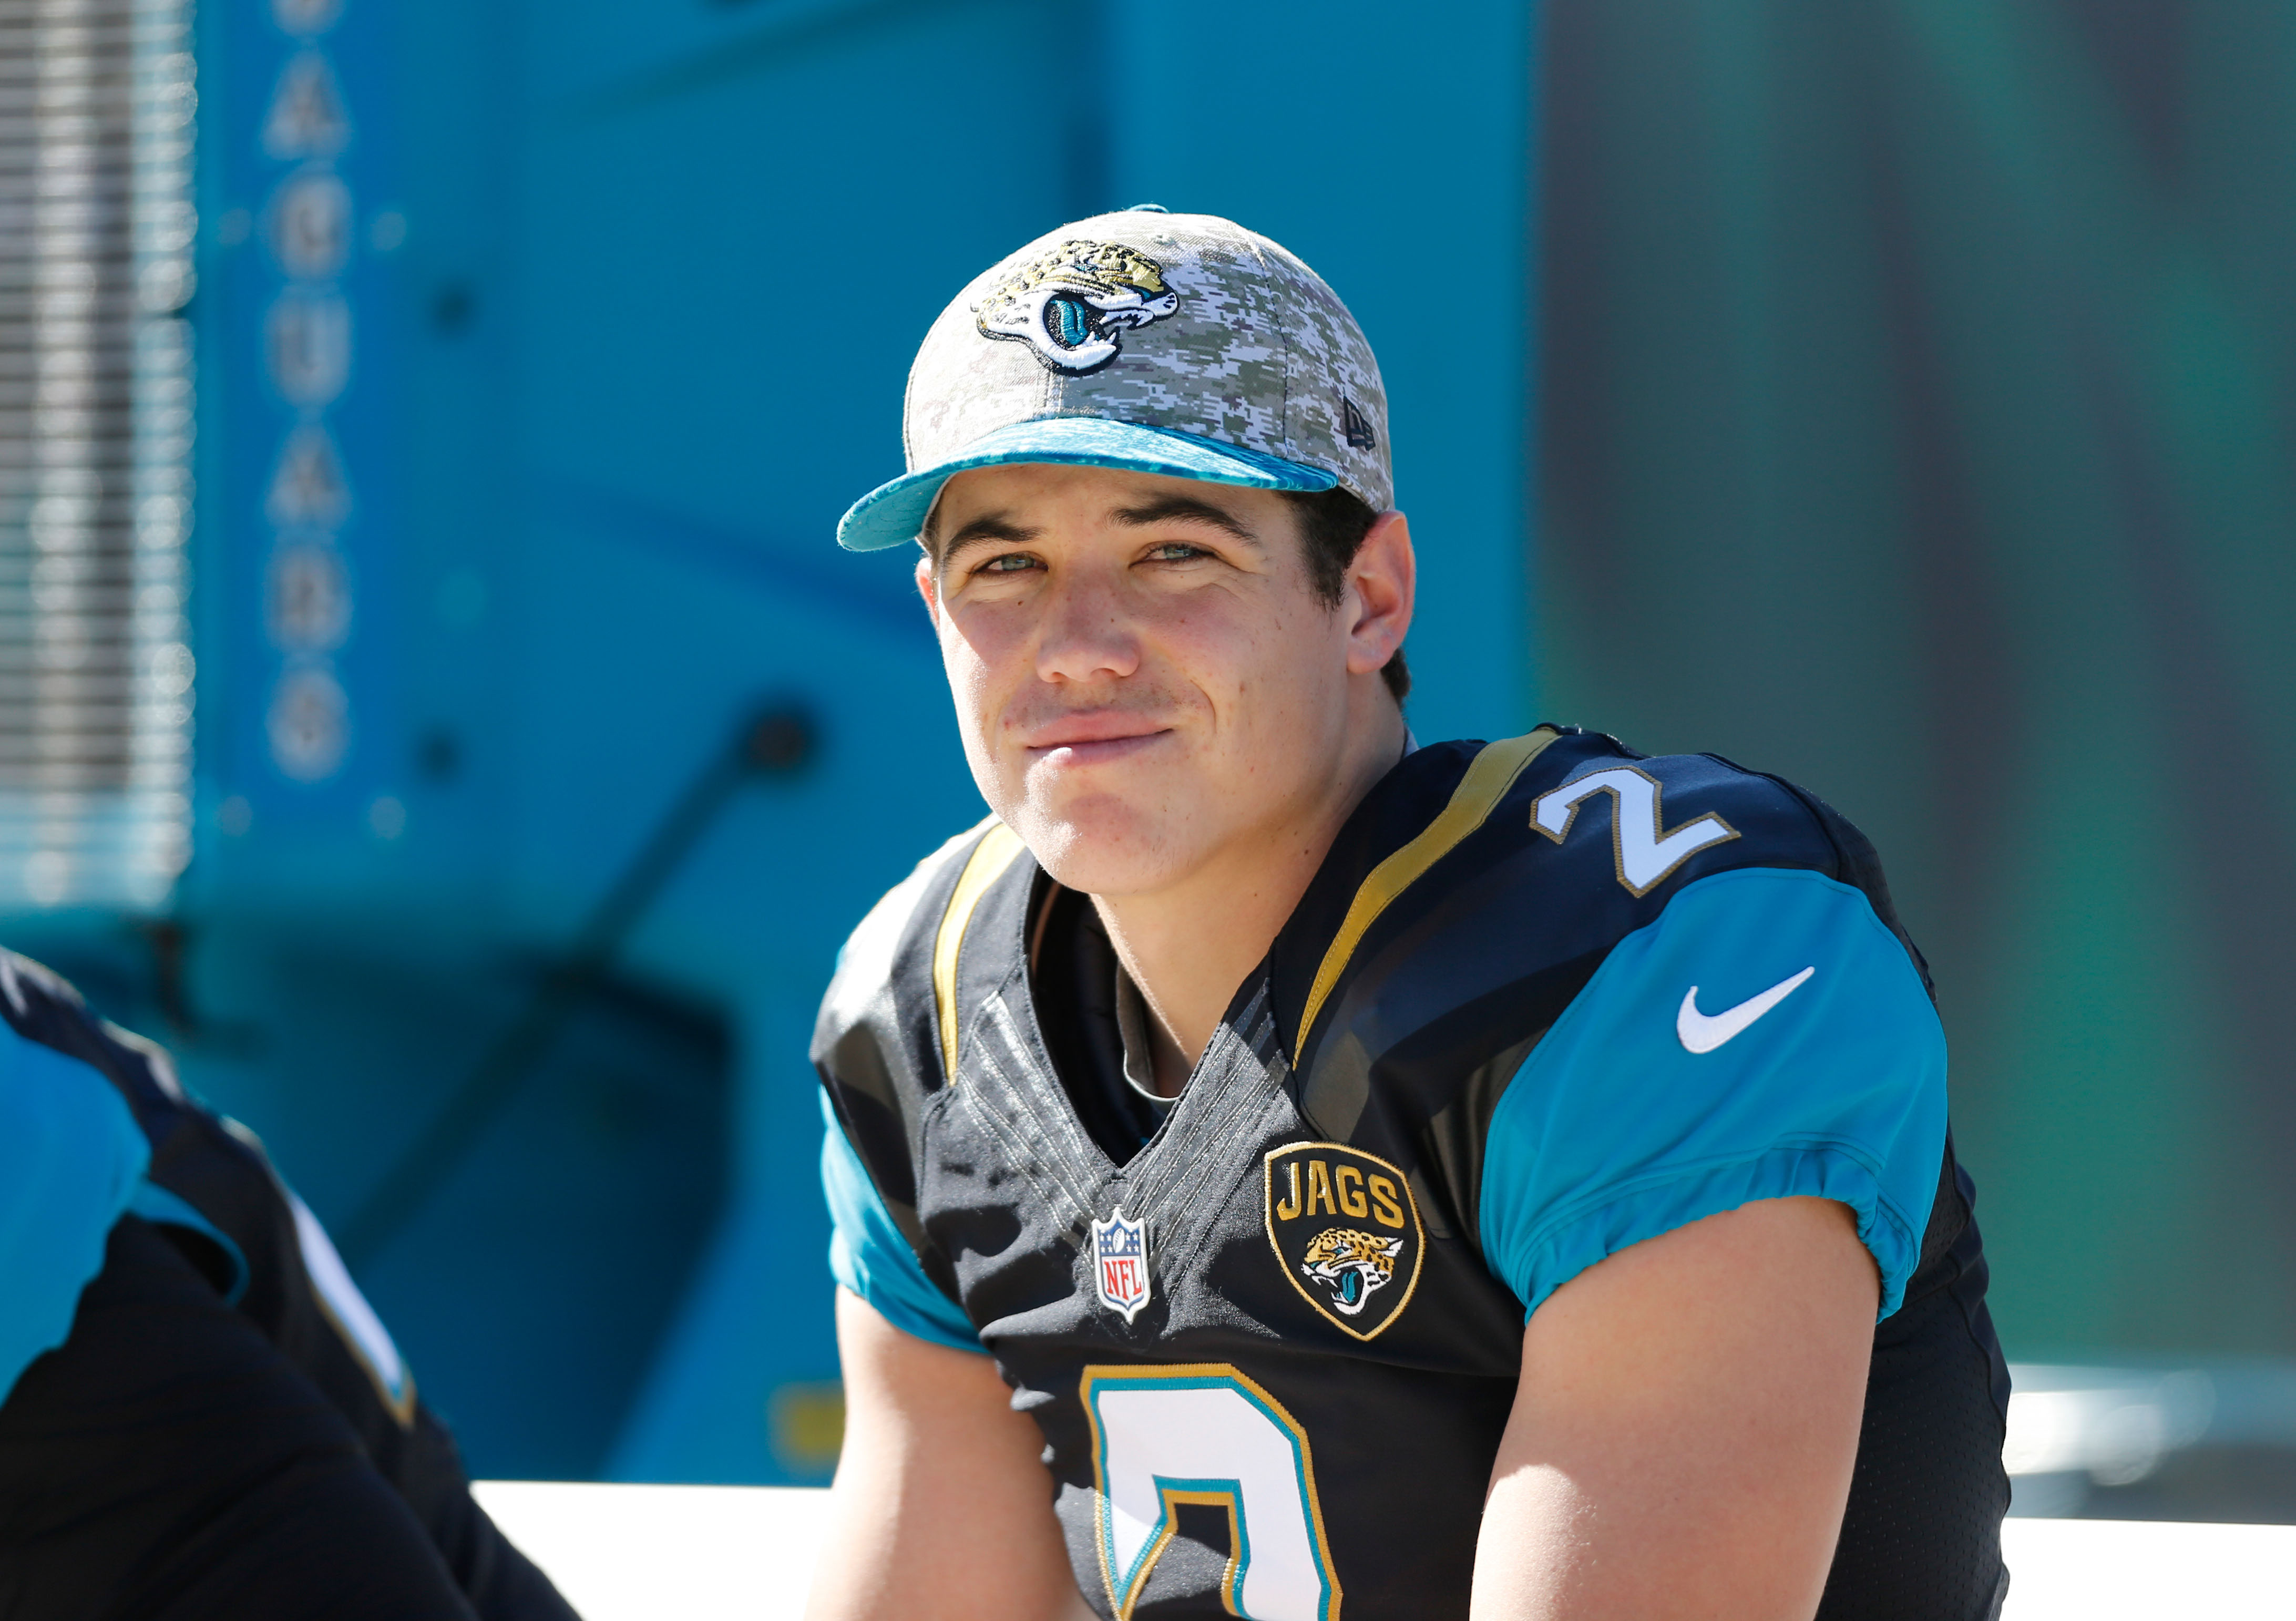 Jaguars staying focused ahead of matchup against the Chargers